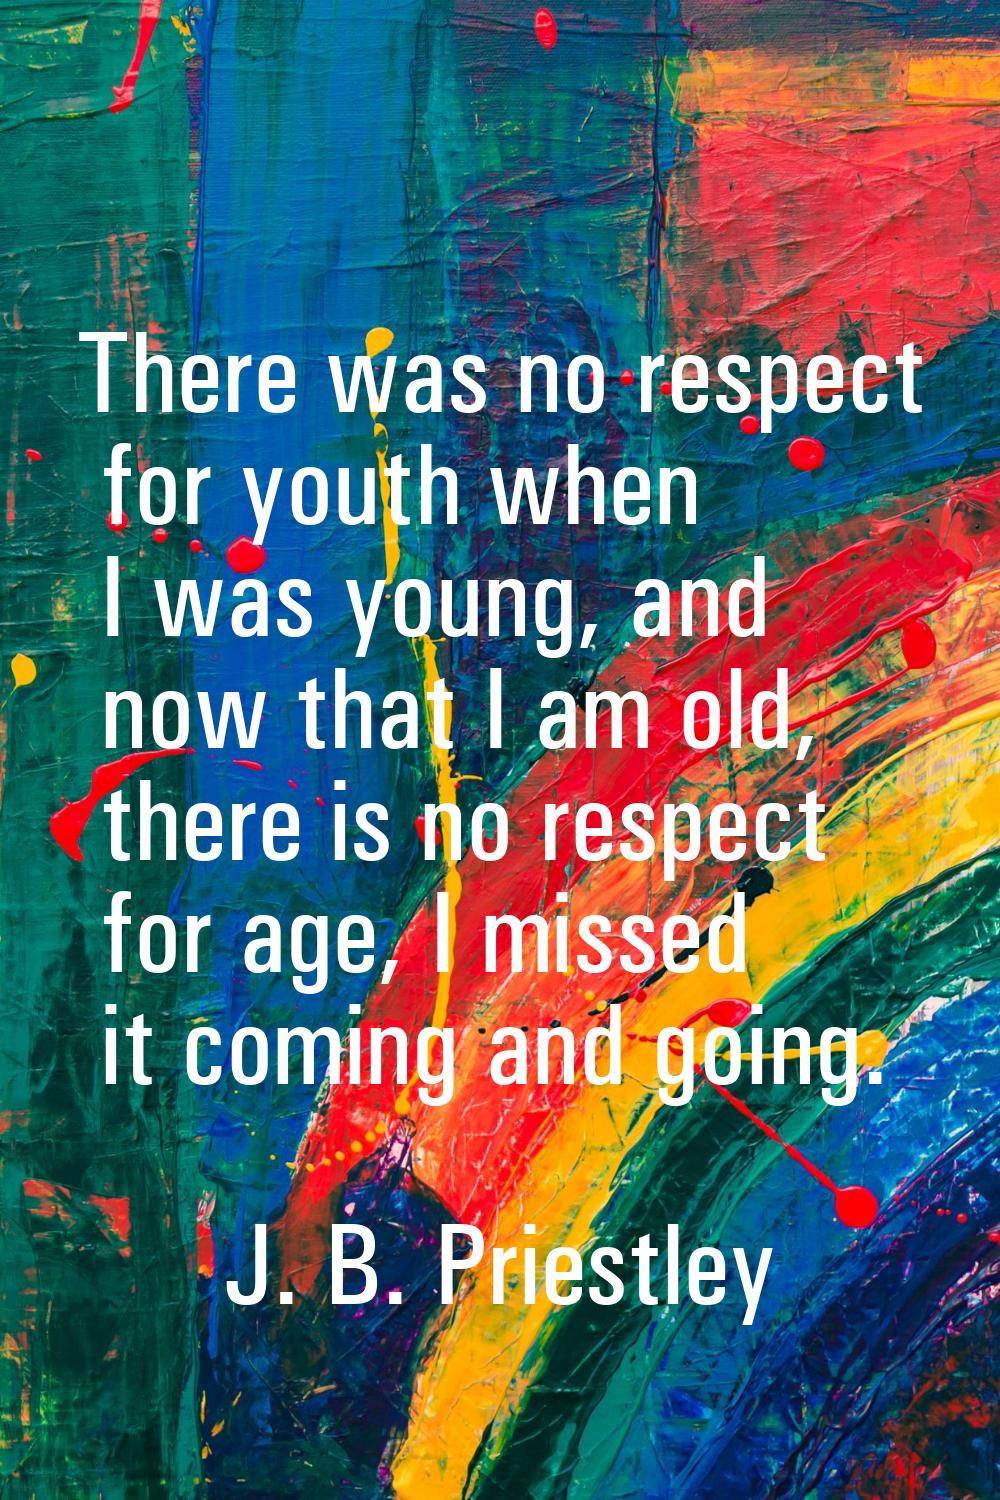 There was no respect for youth when I was young, and now that I am old, there is no respect for age